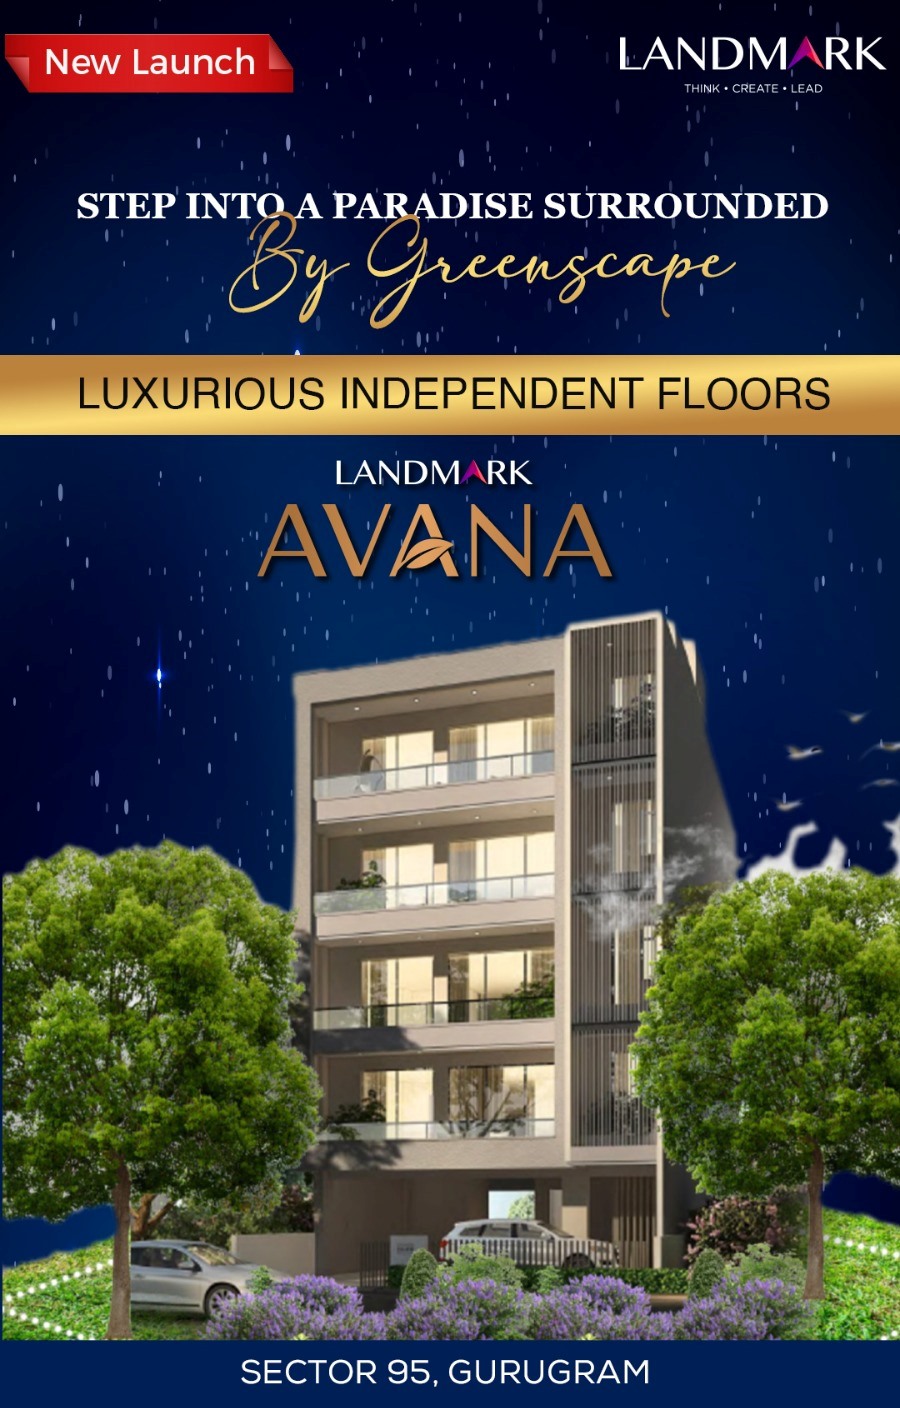 Step into a paradise surrounded by Green Scape at Landmark Avana in Sector 95, Gurgaon